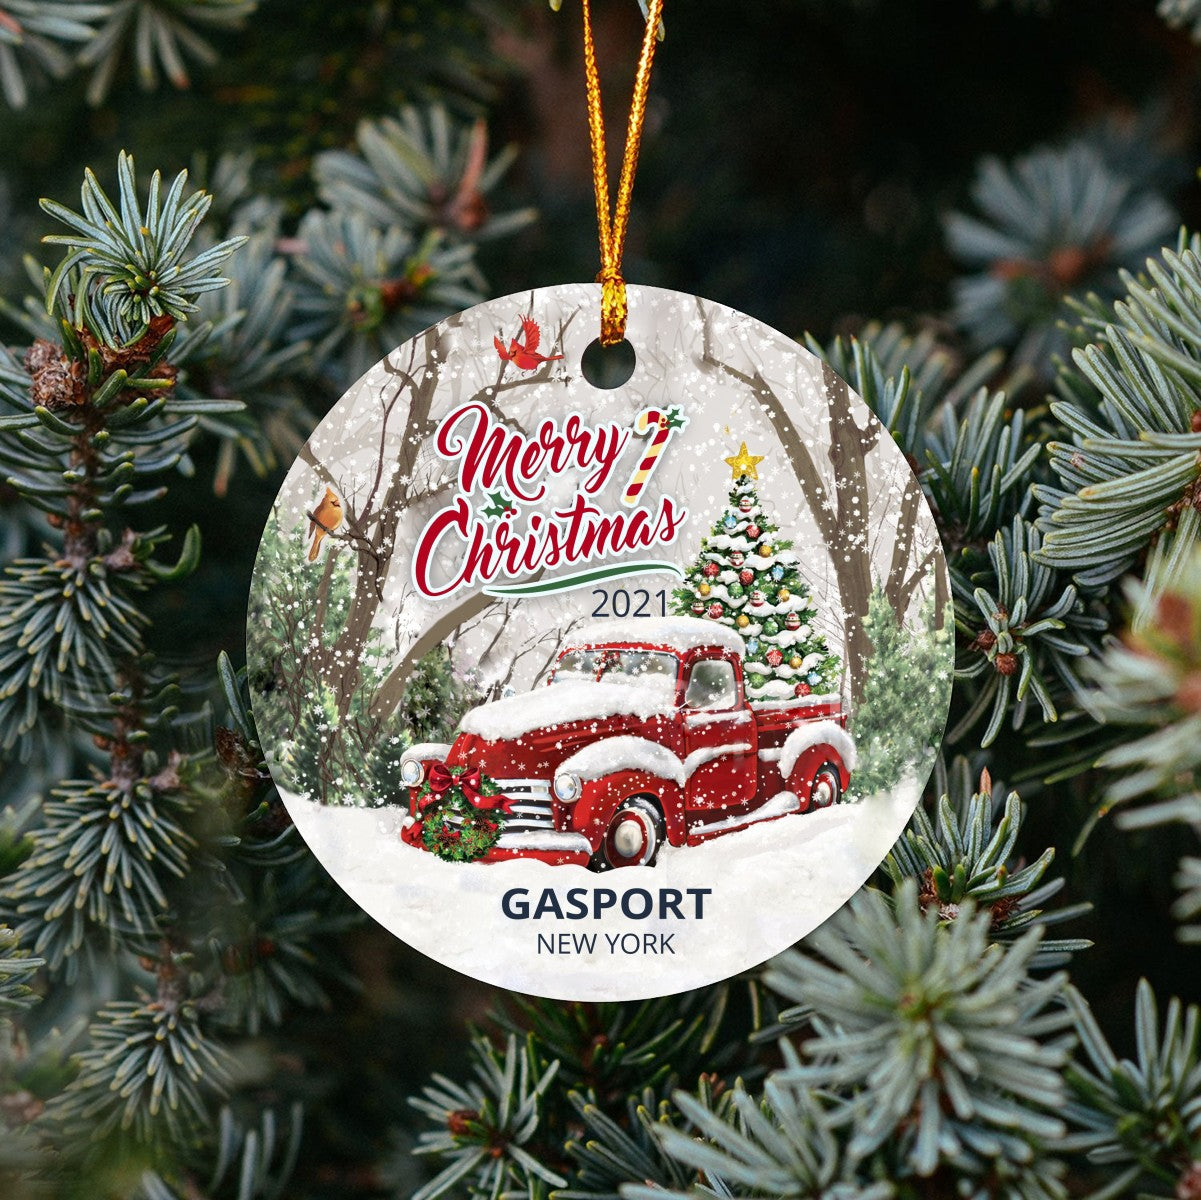 Christmas Tree Ornaments Gasport - Ornament With Name City, State Gasport New York NY Ornament - Red Truck Xmas Ornaments 3'' Plastic Gift For Family, Friend And Housewarming